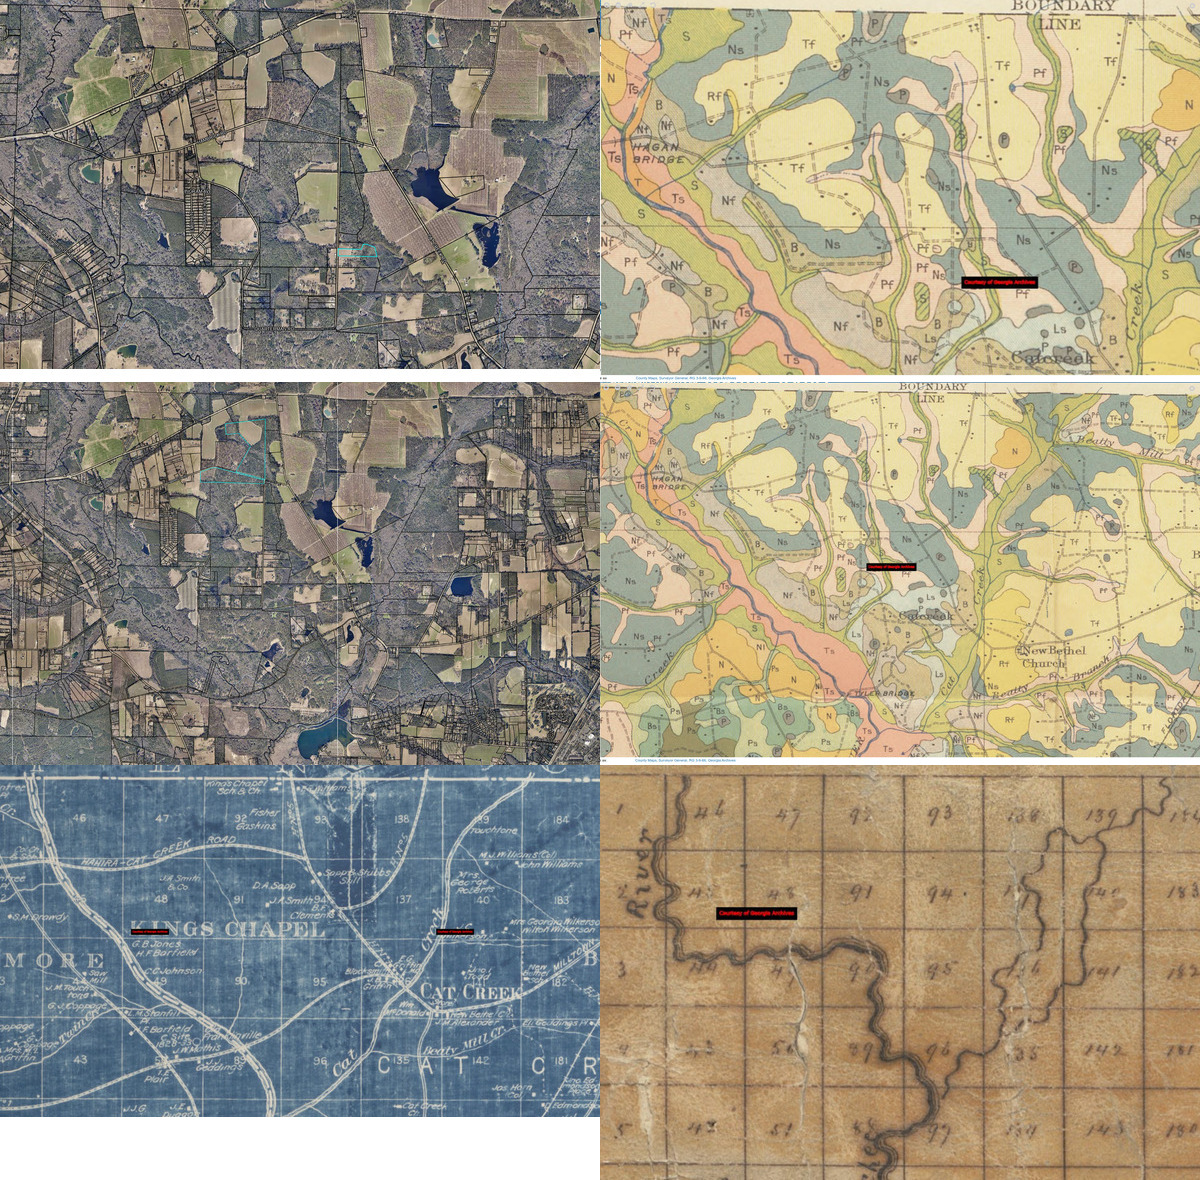 [1917 and 2023 maps compared]